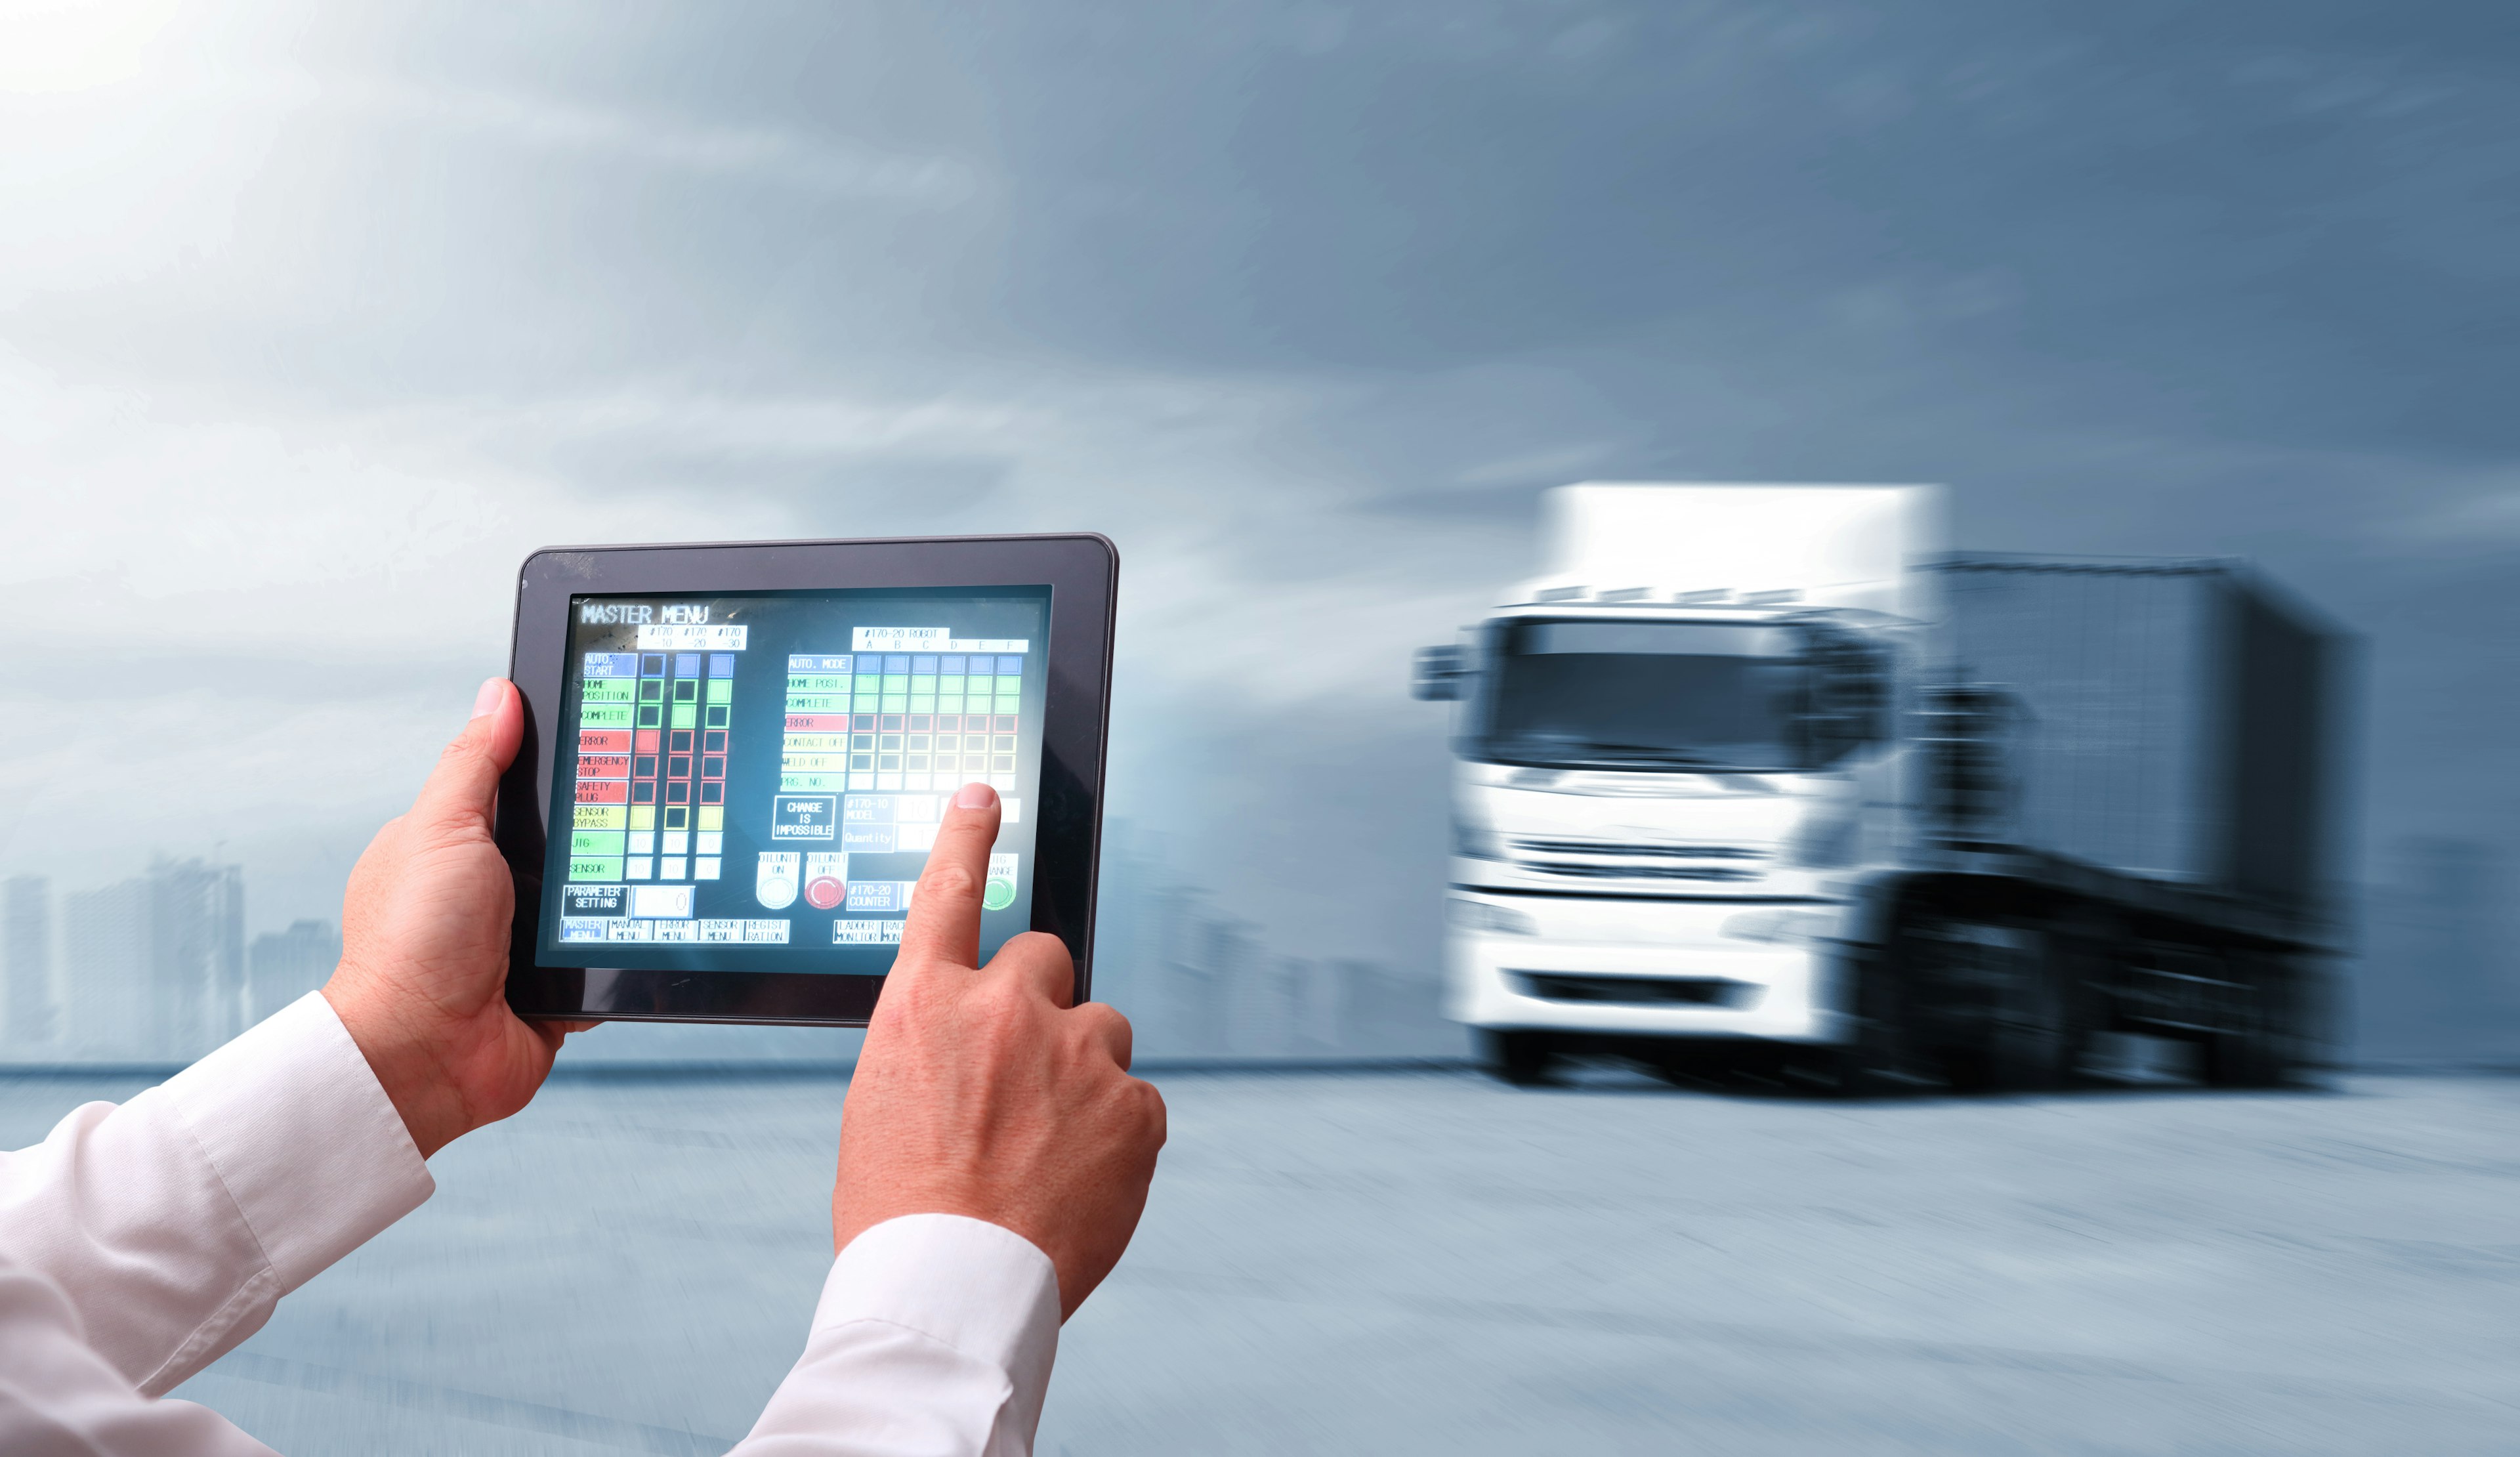 Many logistics companies need help to adapt to the post-pandemic business environment. Read about the paradigm shift of modern apps and platforms.